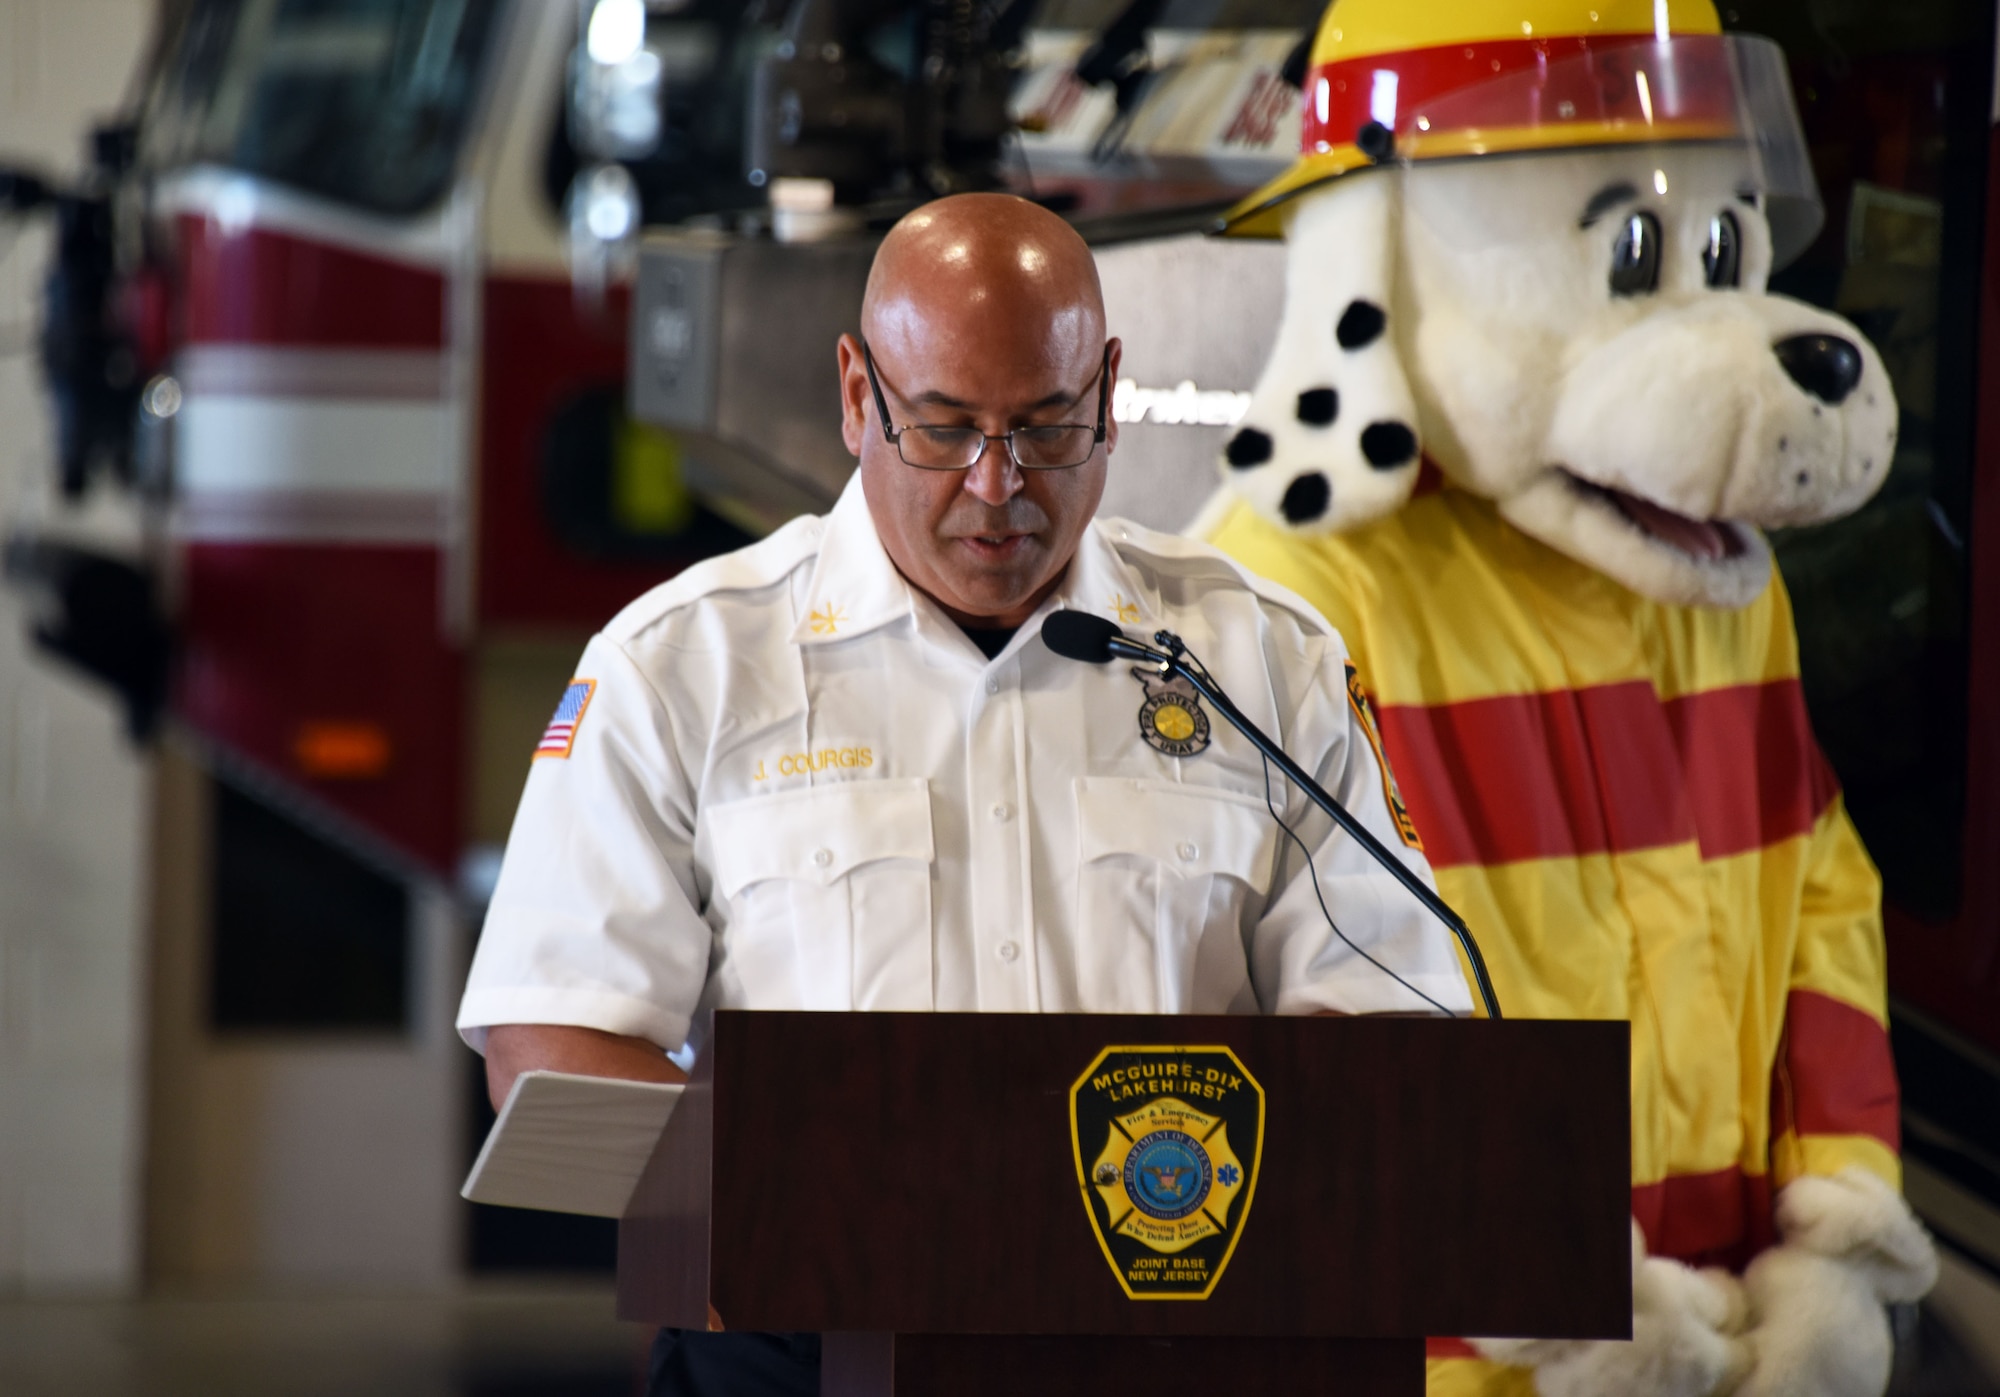 John Courgis, 87th Civil Engineering Squadron Fire Prevention assistant chief, reads about the importance of the Fire Prevention Proclamation, Oct. 5, 2020 at Joint Base McGuire-Dix-Lakehurst, N.J. Fire Prevention Week begins October 4th and runs until October 10th. The goal of Fire Prevention Week is to raise fire safety awareness around the Joint Base MDL Community.